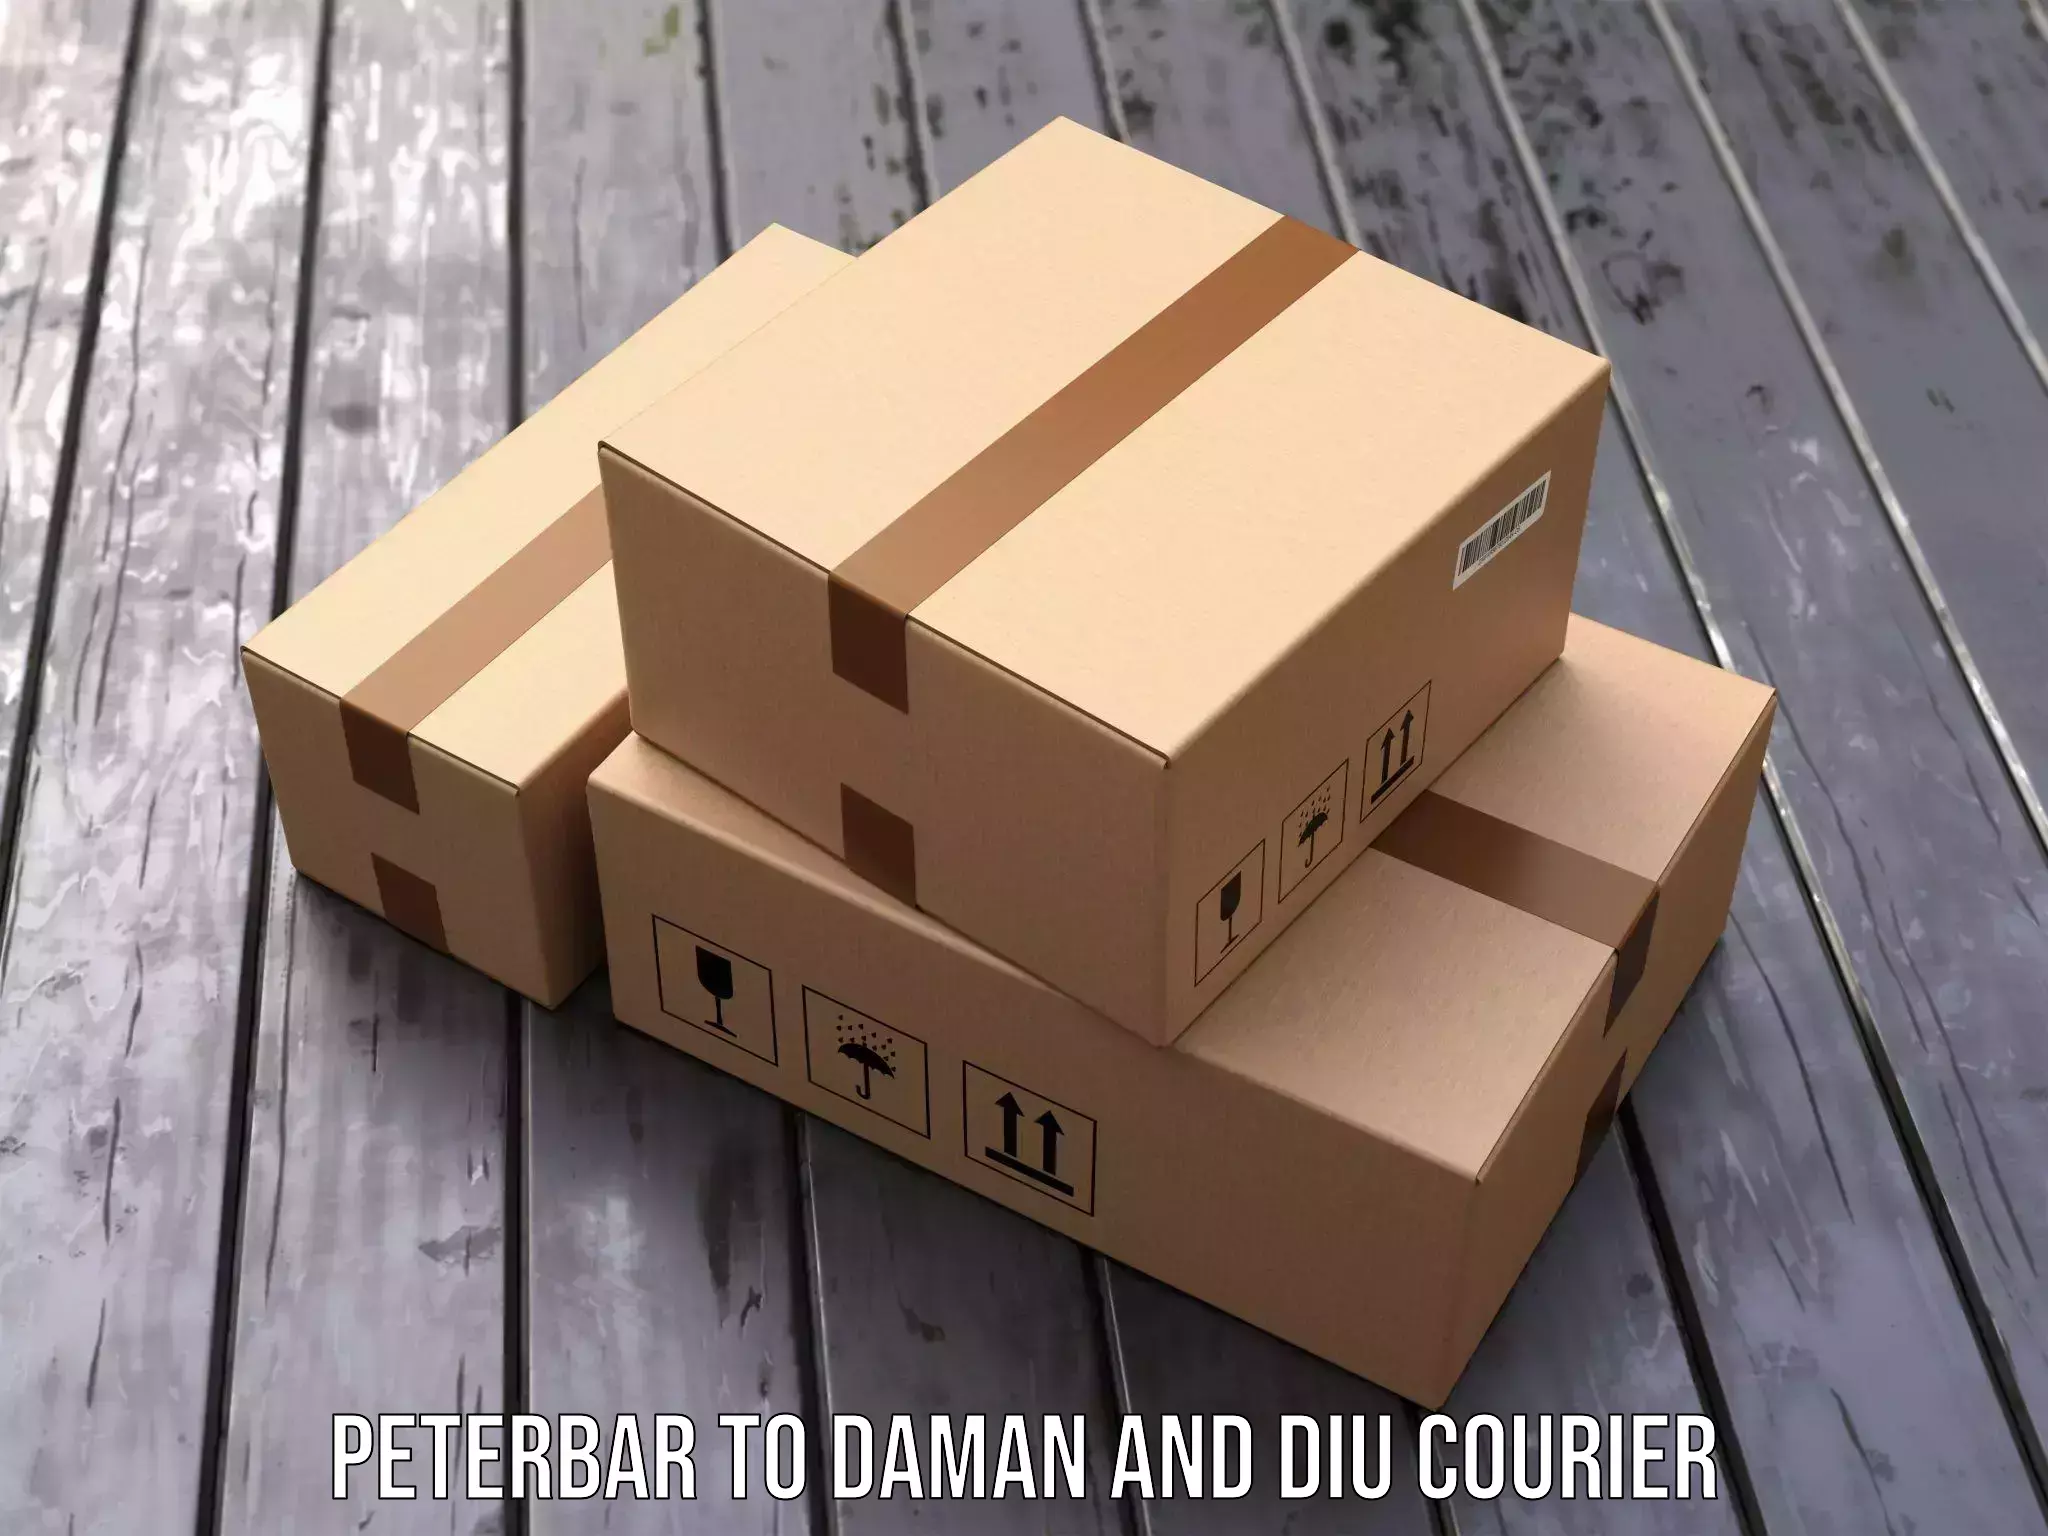 Courier service comparison in Peterbar to Daman and Diu